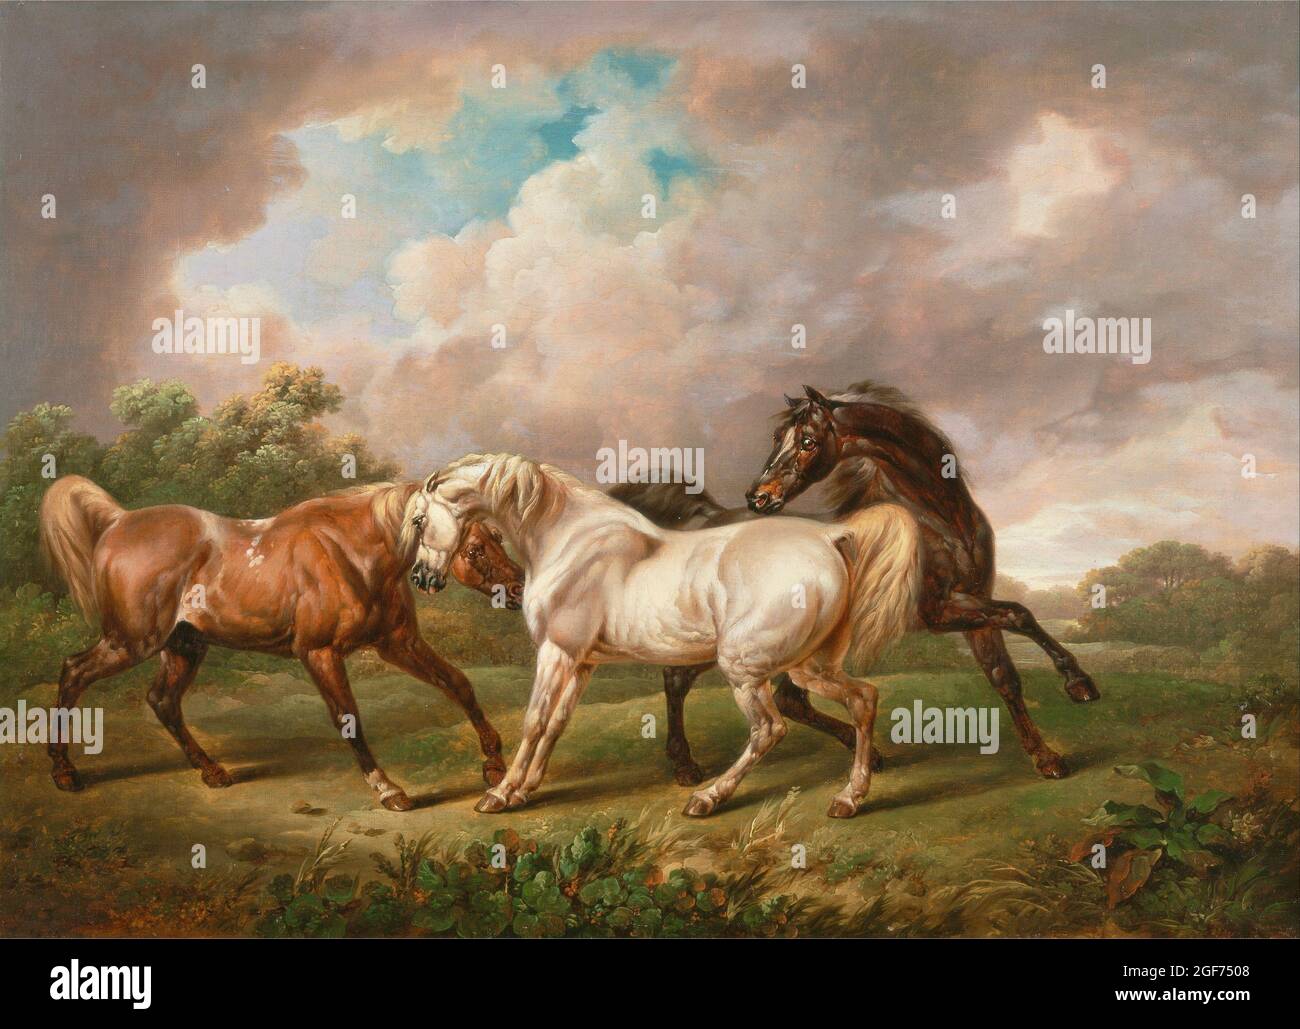 Charles Towne - Three Horses in a Stormy Landscape - 1836 Stock Photo